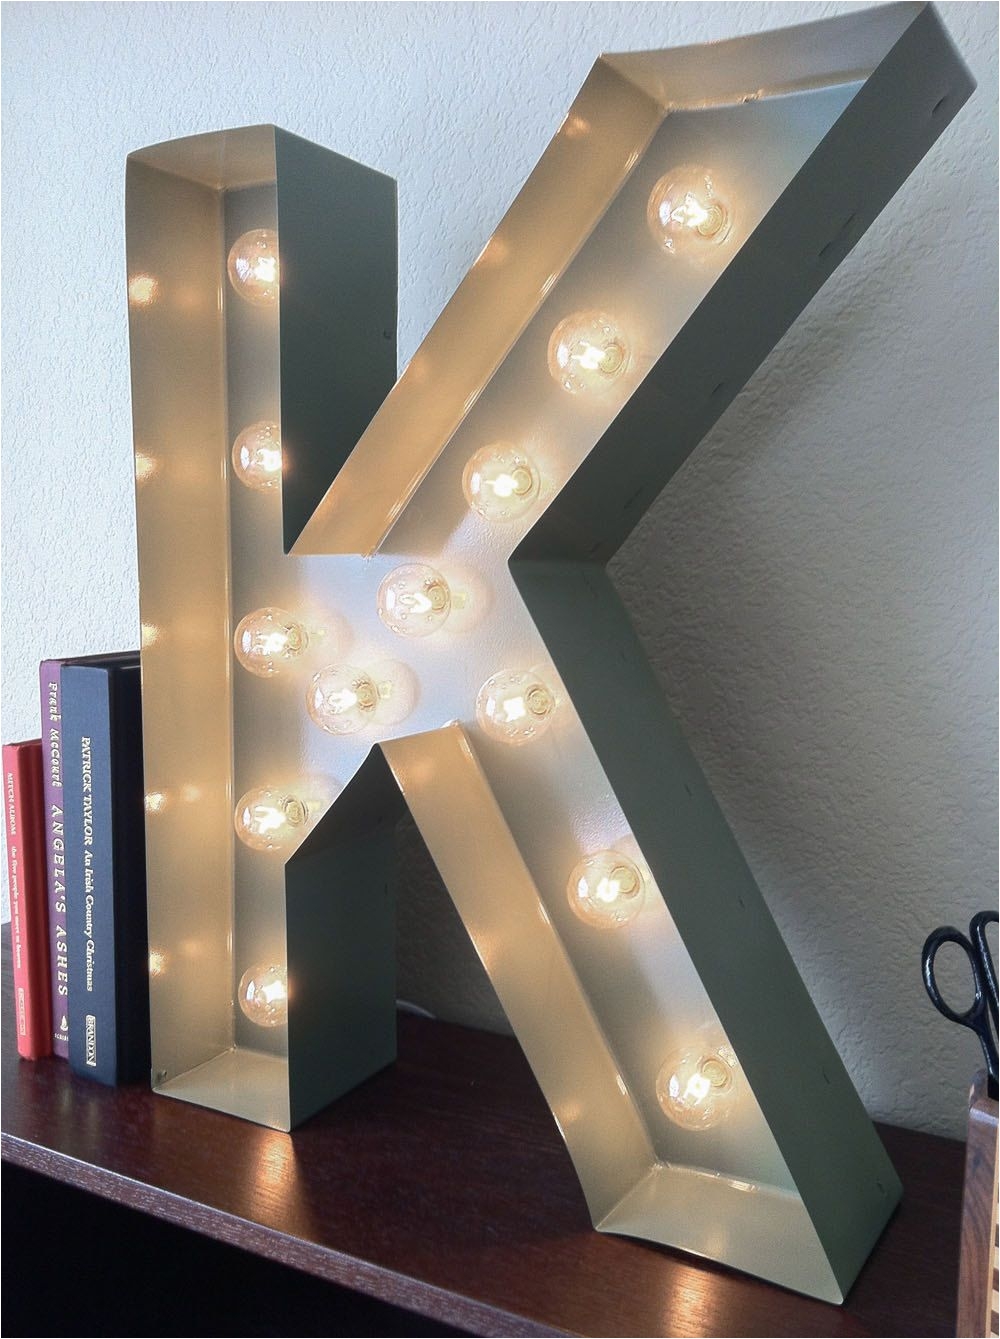 vintage inspired marquee light letter k 150 00 via etsy initial wall